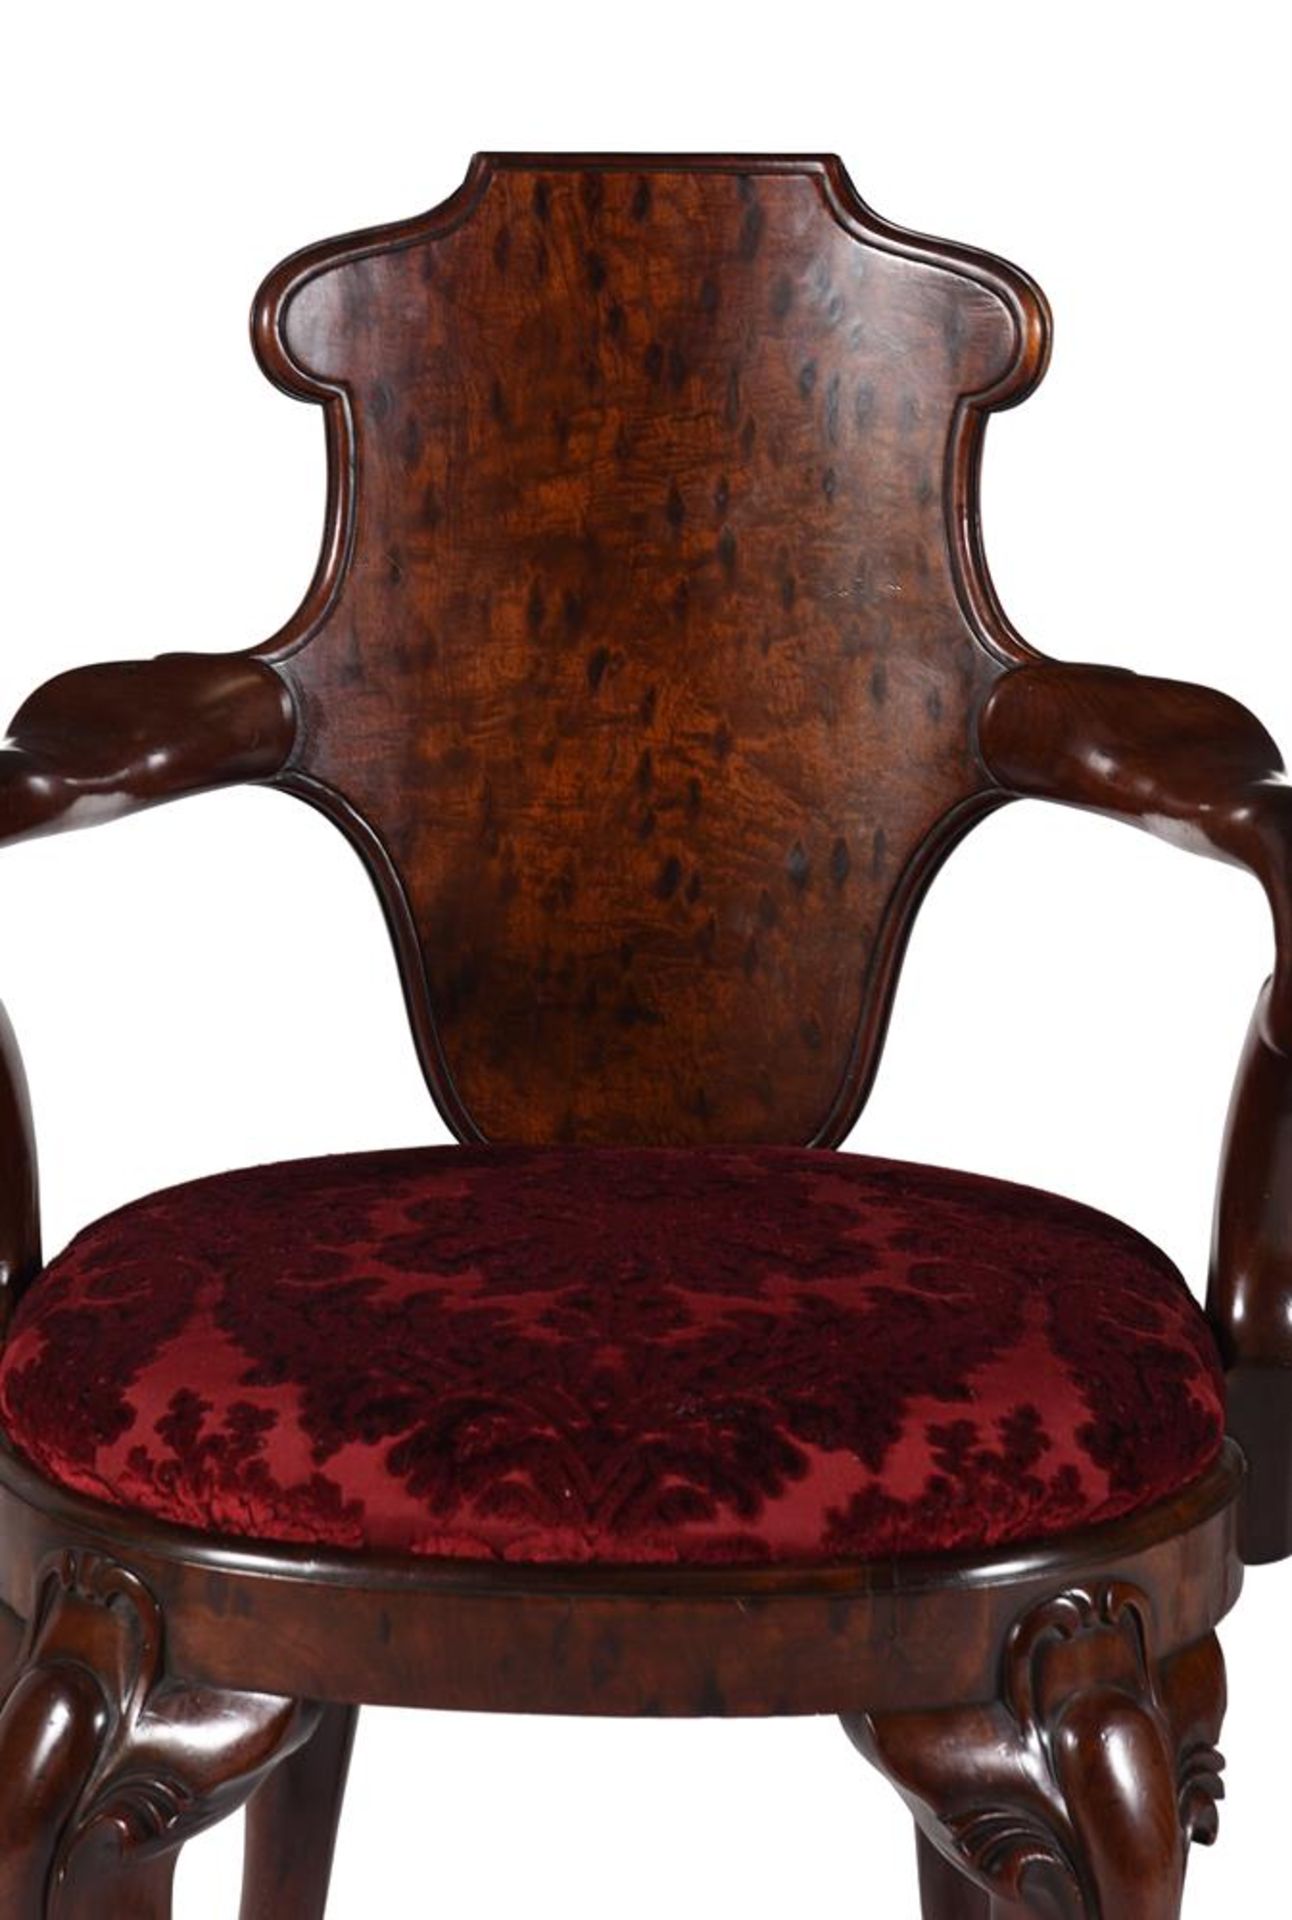 A PAIR OF WILLIAM IV MAHOGANY AND 'PLUM PUDDING' MAHOGANY ARMCHAIRS, ATTRIBUTED TO GILLOWS - Image 4 of 6